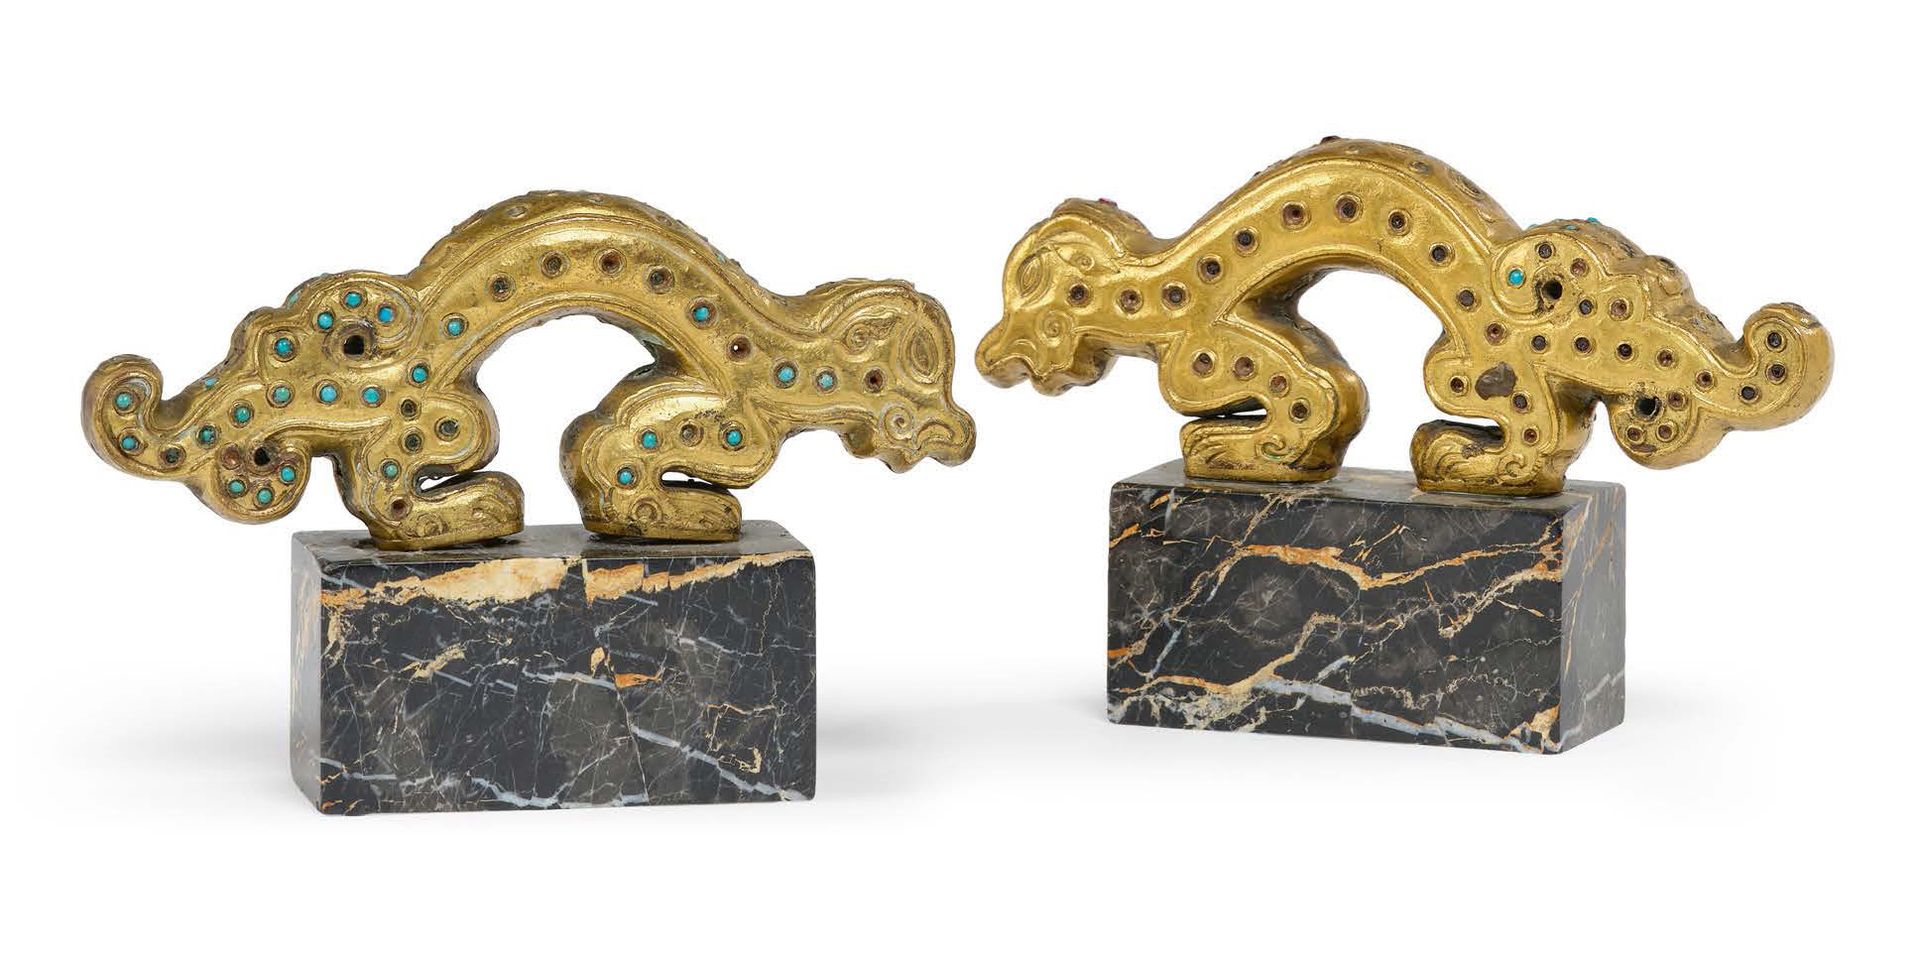 CHINE DYNASTIE QING, XVIIIe SIÈCLE Pair of decorative elements in gilt bronze an&hellip;